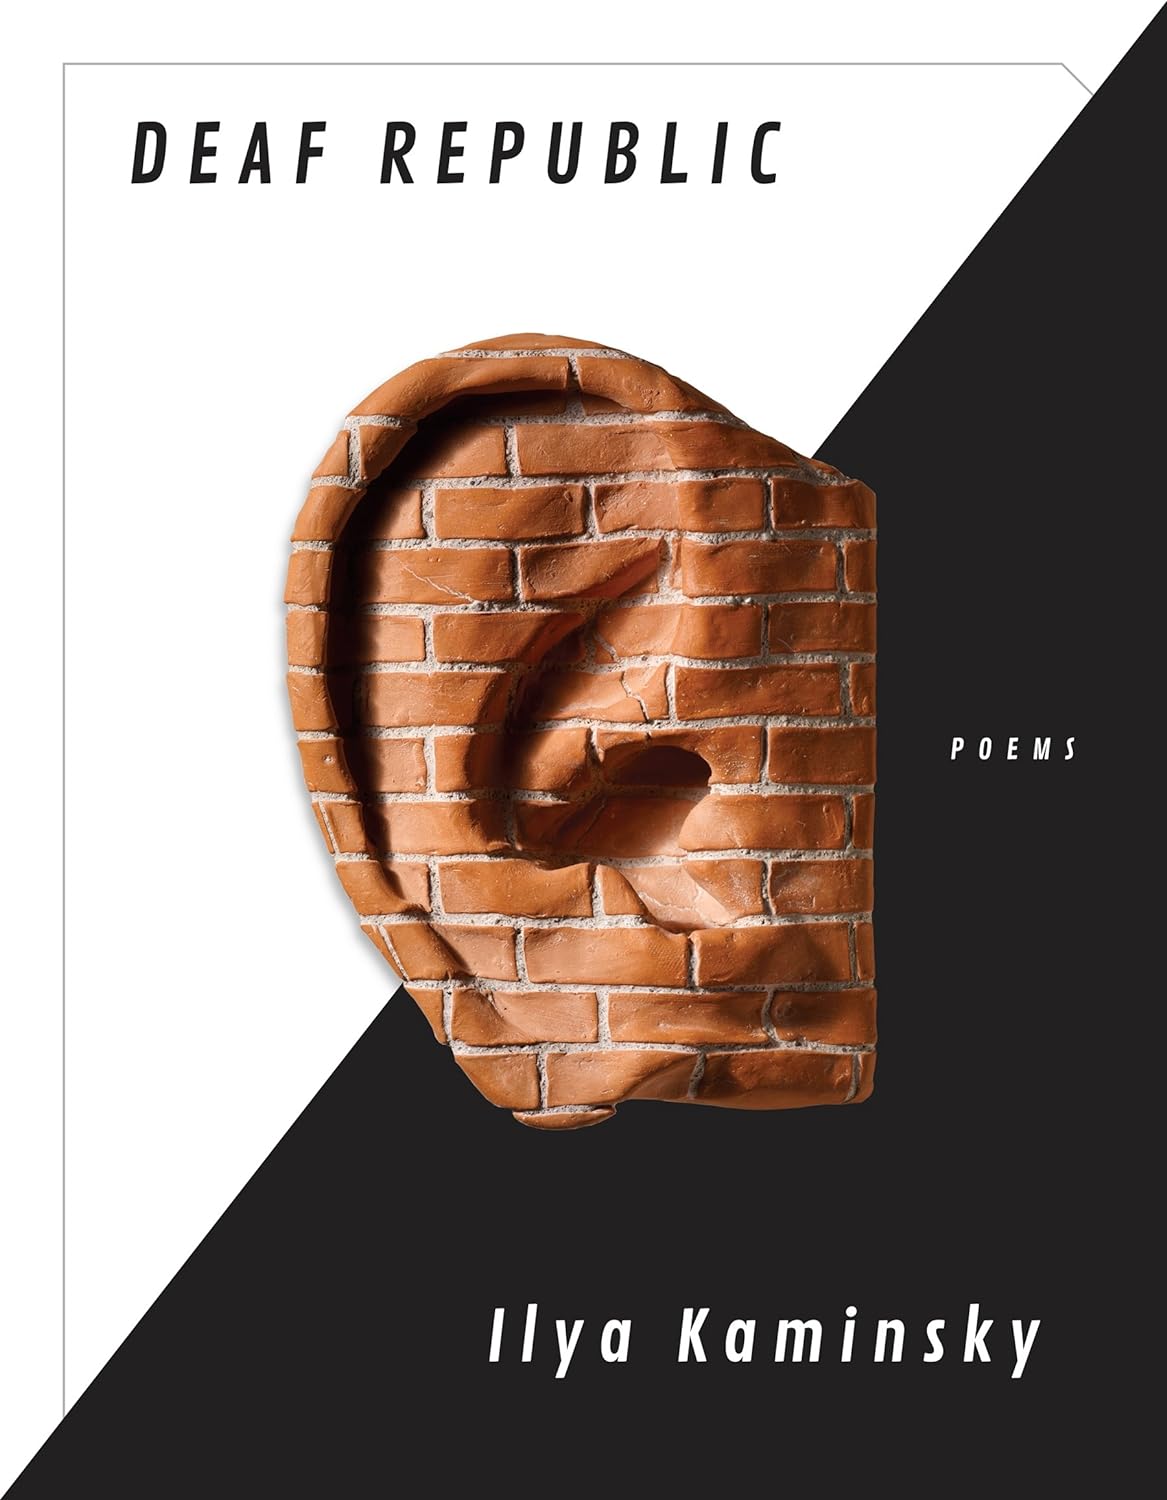 The cover of Deaf Republic. There is an ear made out of red bricks against a white and black background